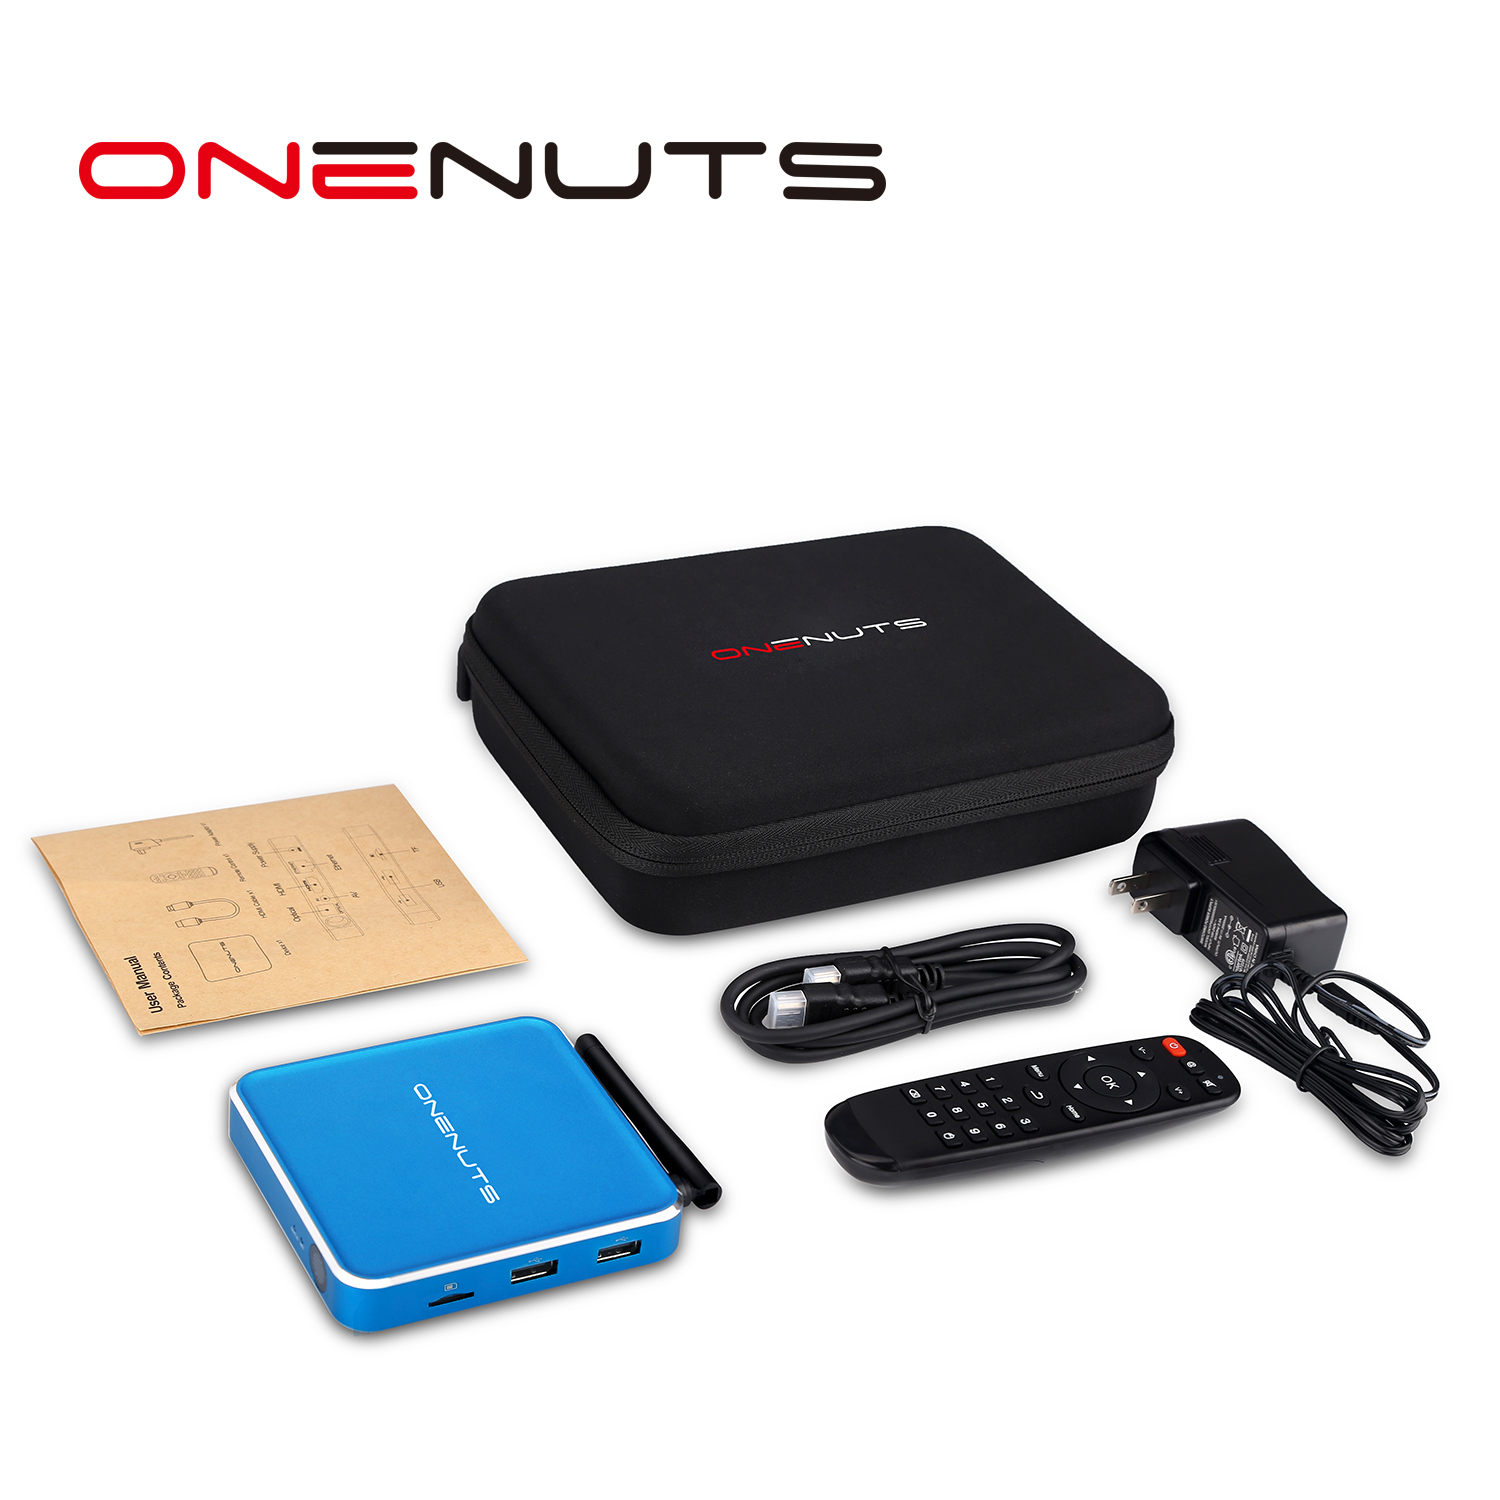 Network Media Player Android TV Box Manufacturer